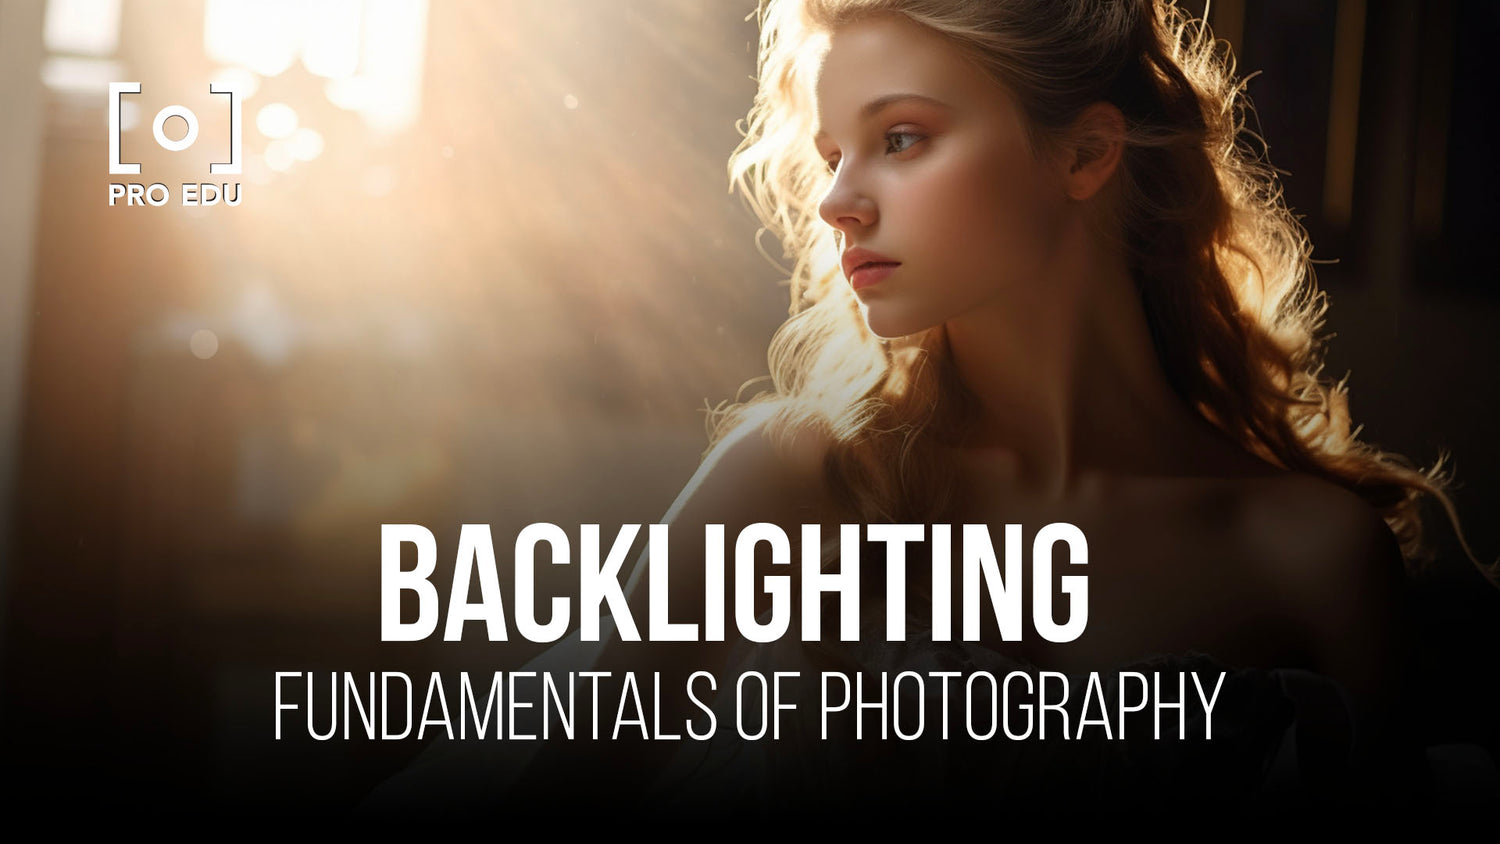 Mastering backlighting techniques in photography to create dramatic and visually stunning images